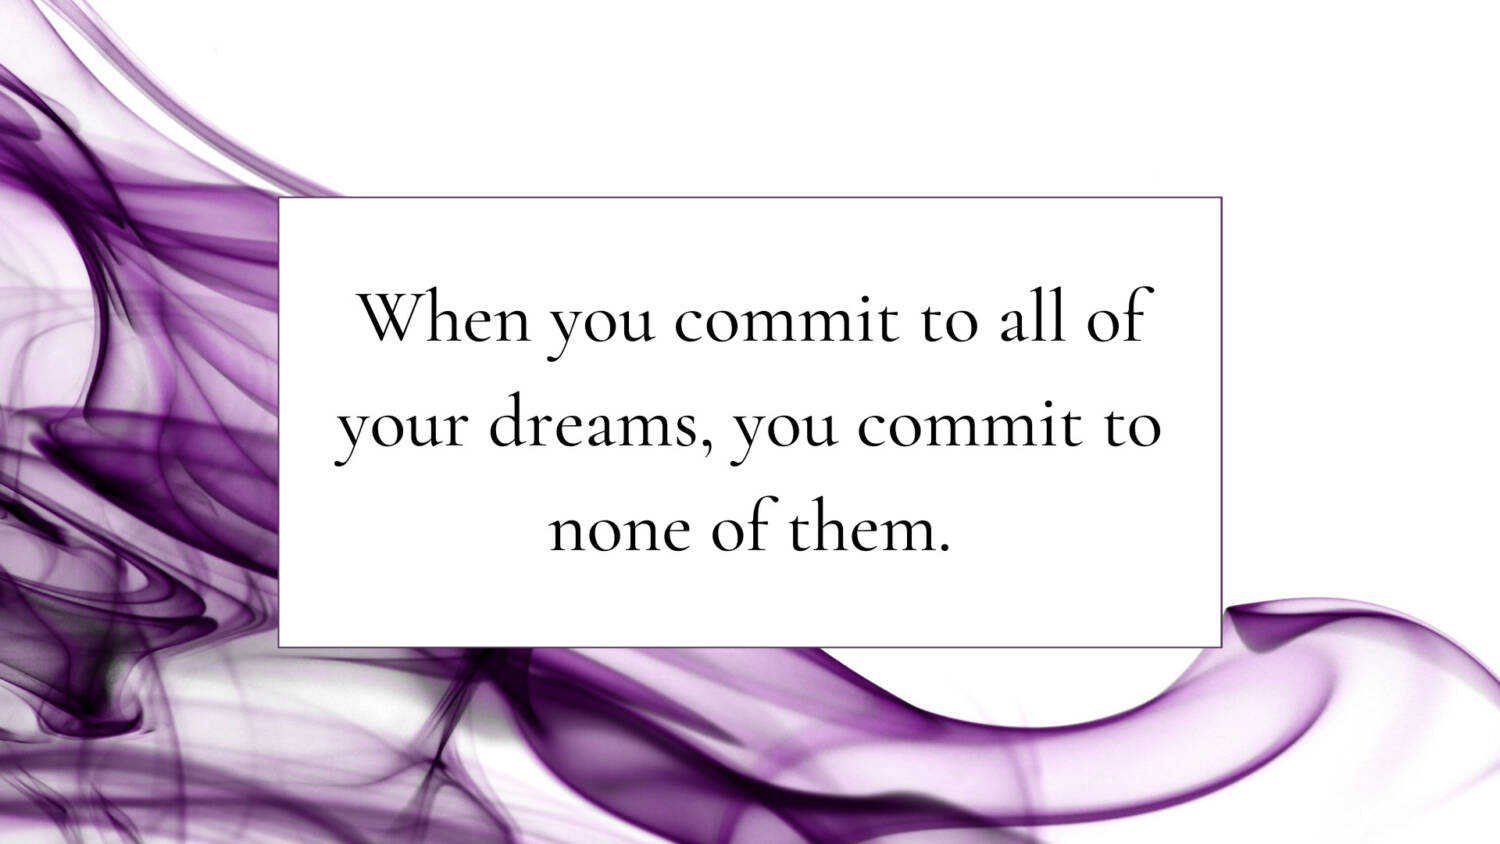 When you commit to all of your dreams, you commit to none of them.